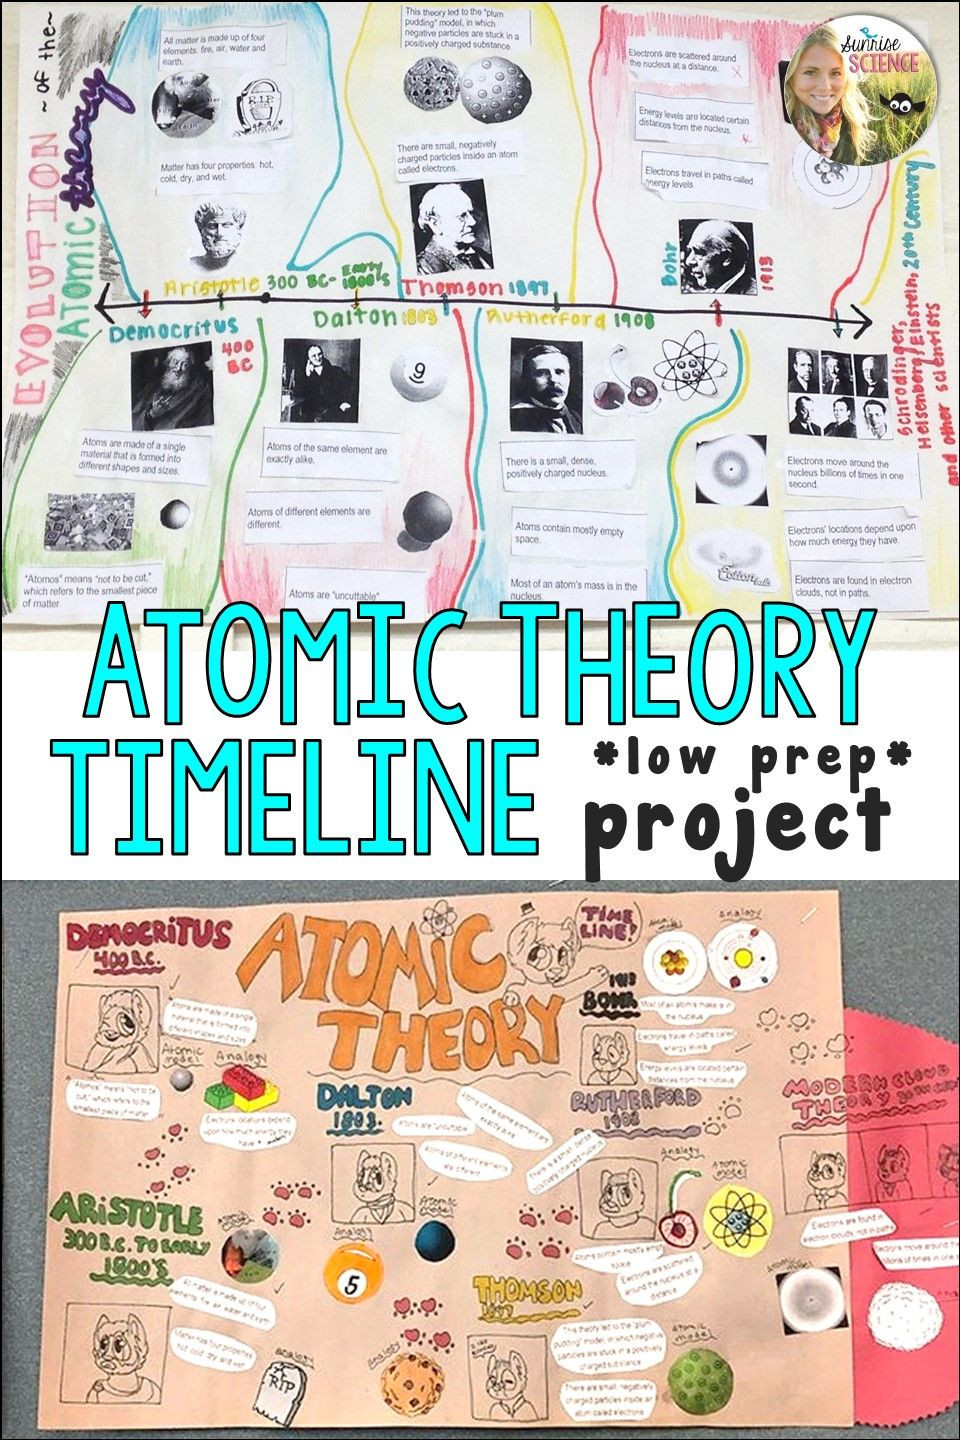 Development Of atomic theory Worksheet atomic theory Timeline Project A Visual History Of the atom